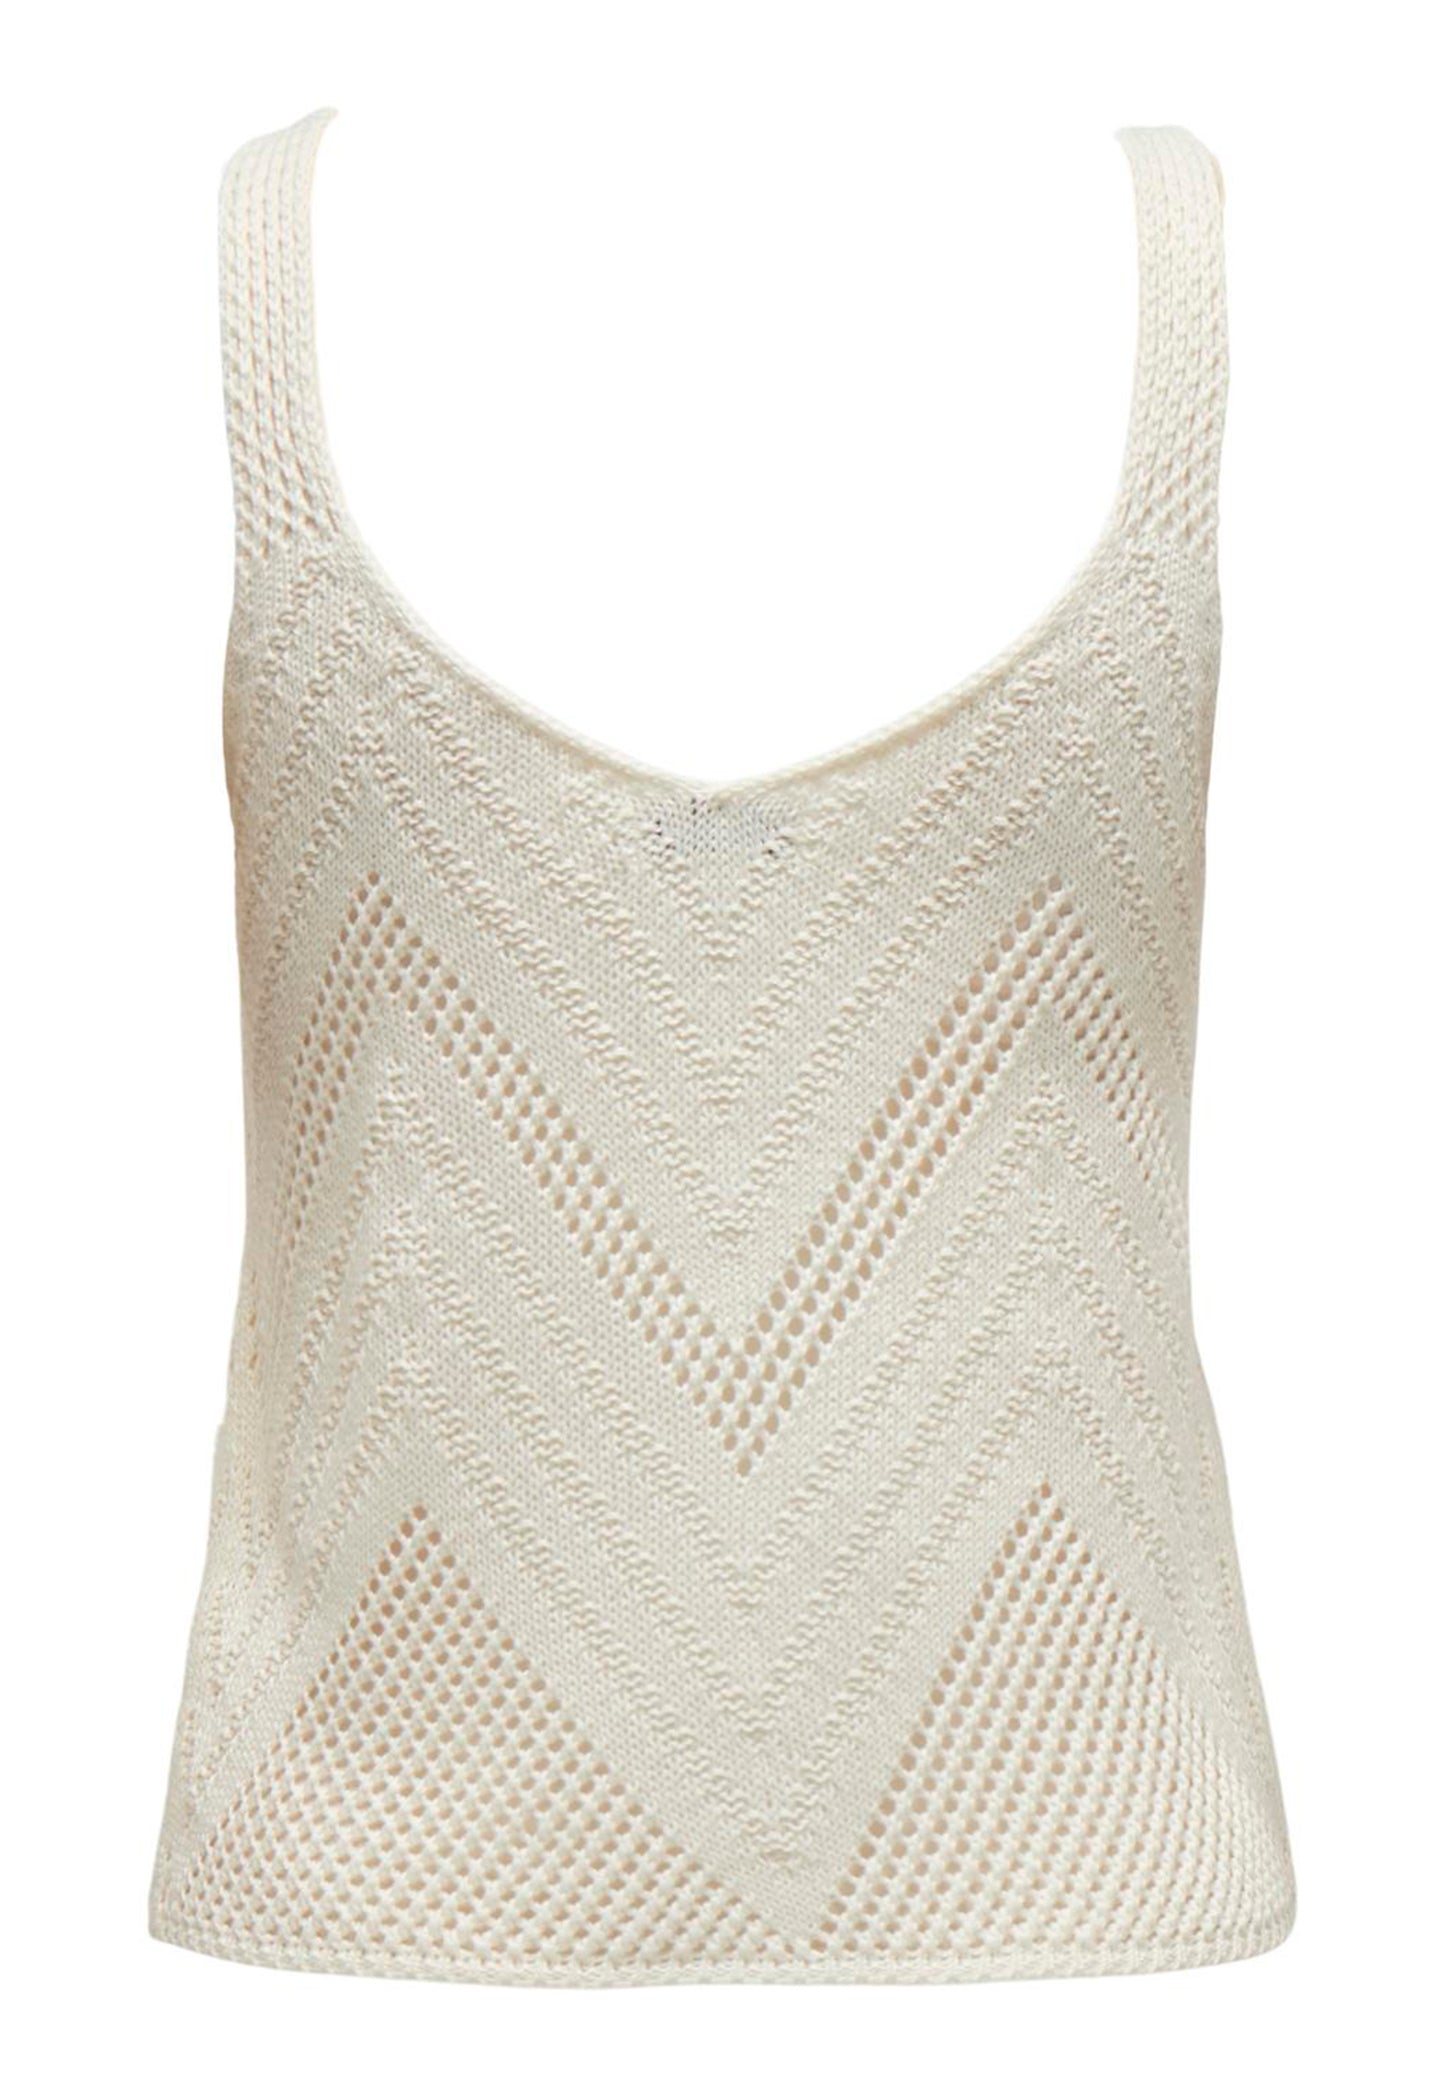 
                  
                    JDY Sun Crochet Knitted Sleeveless Strappy Vest Top in Cream - One Nation Clothing
                  
                